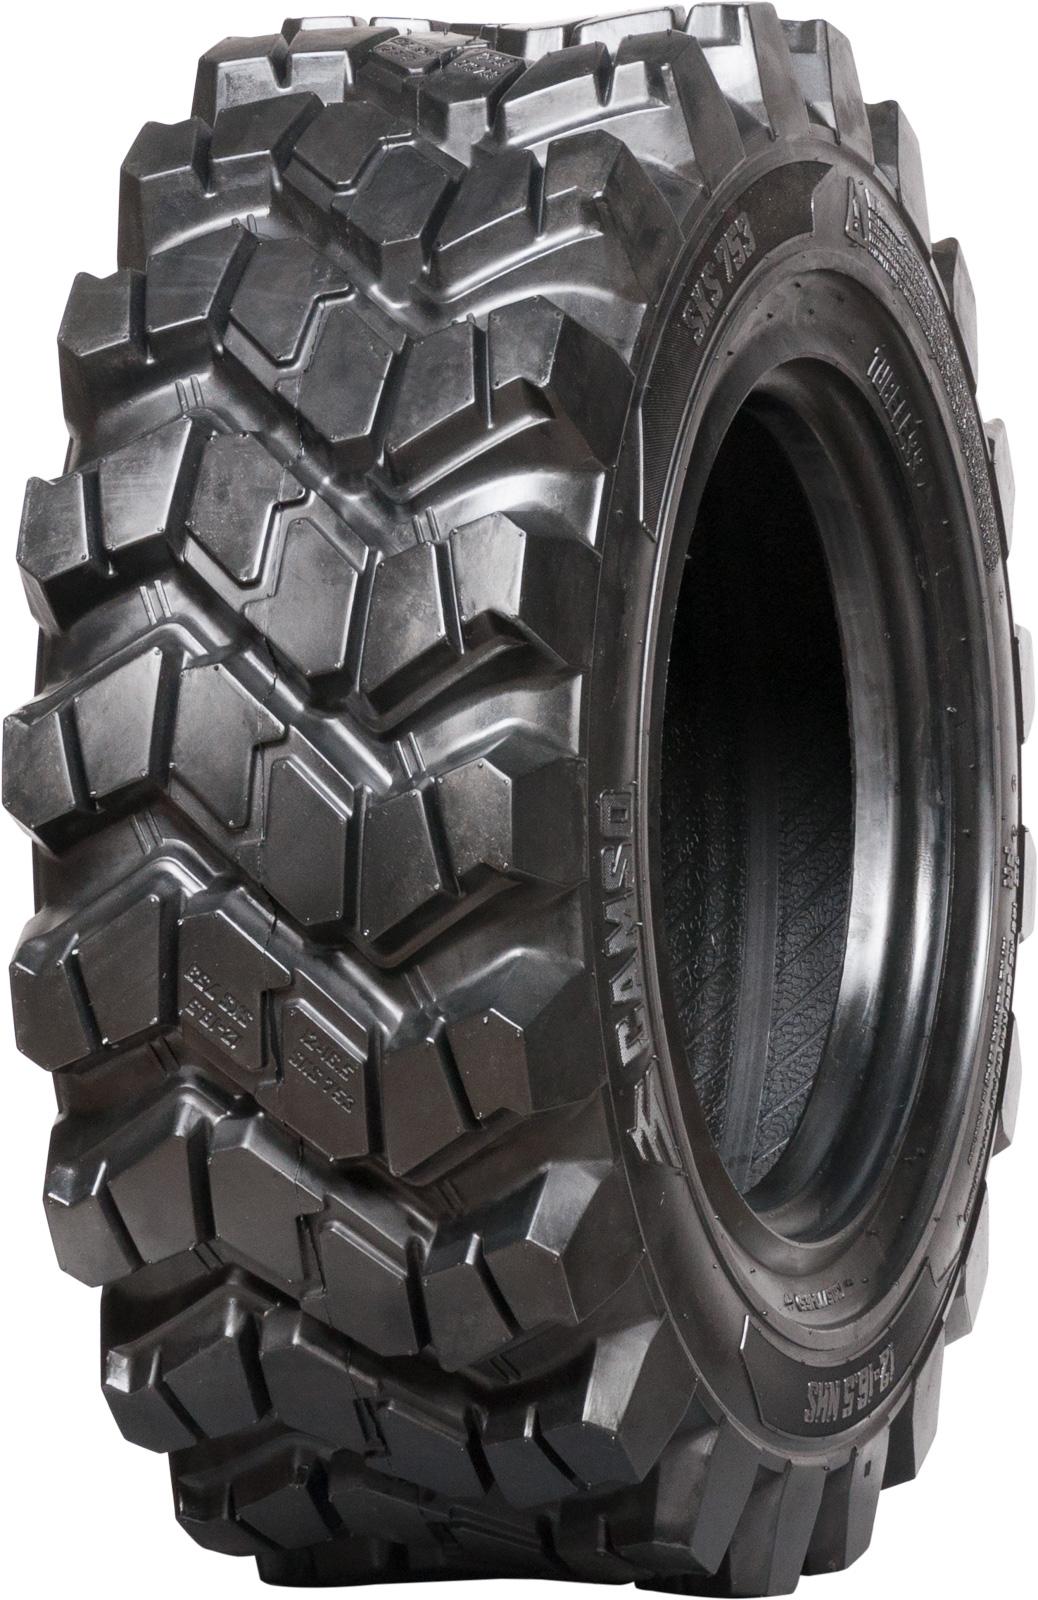 set of 4 10x16.5 camso sks 753 10-ply tire skid steer tires